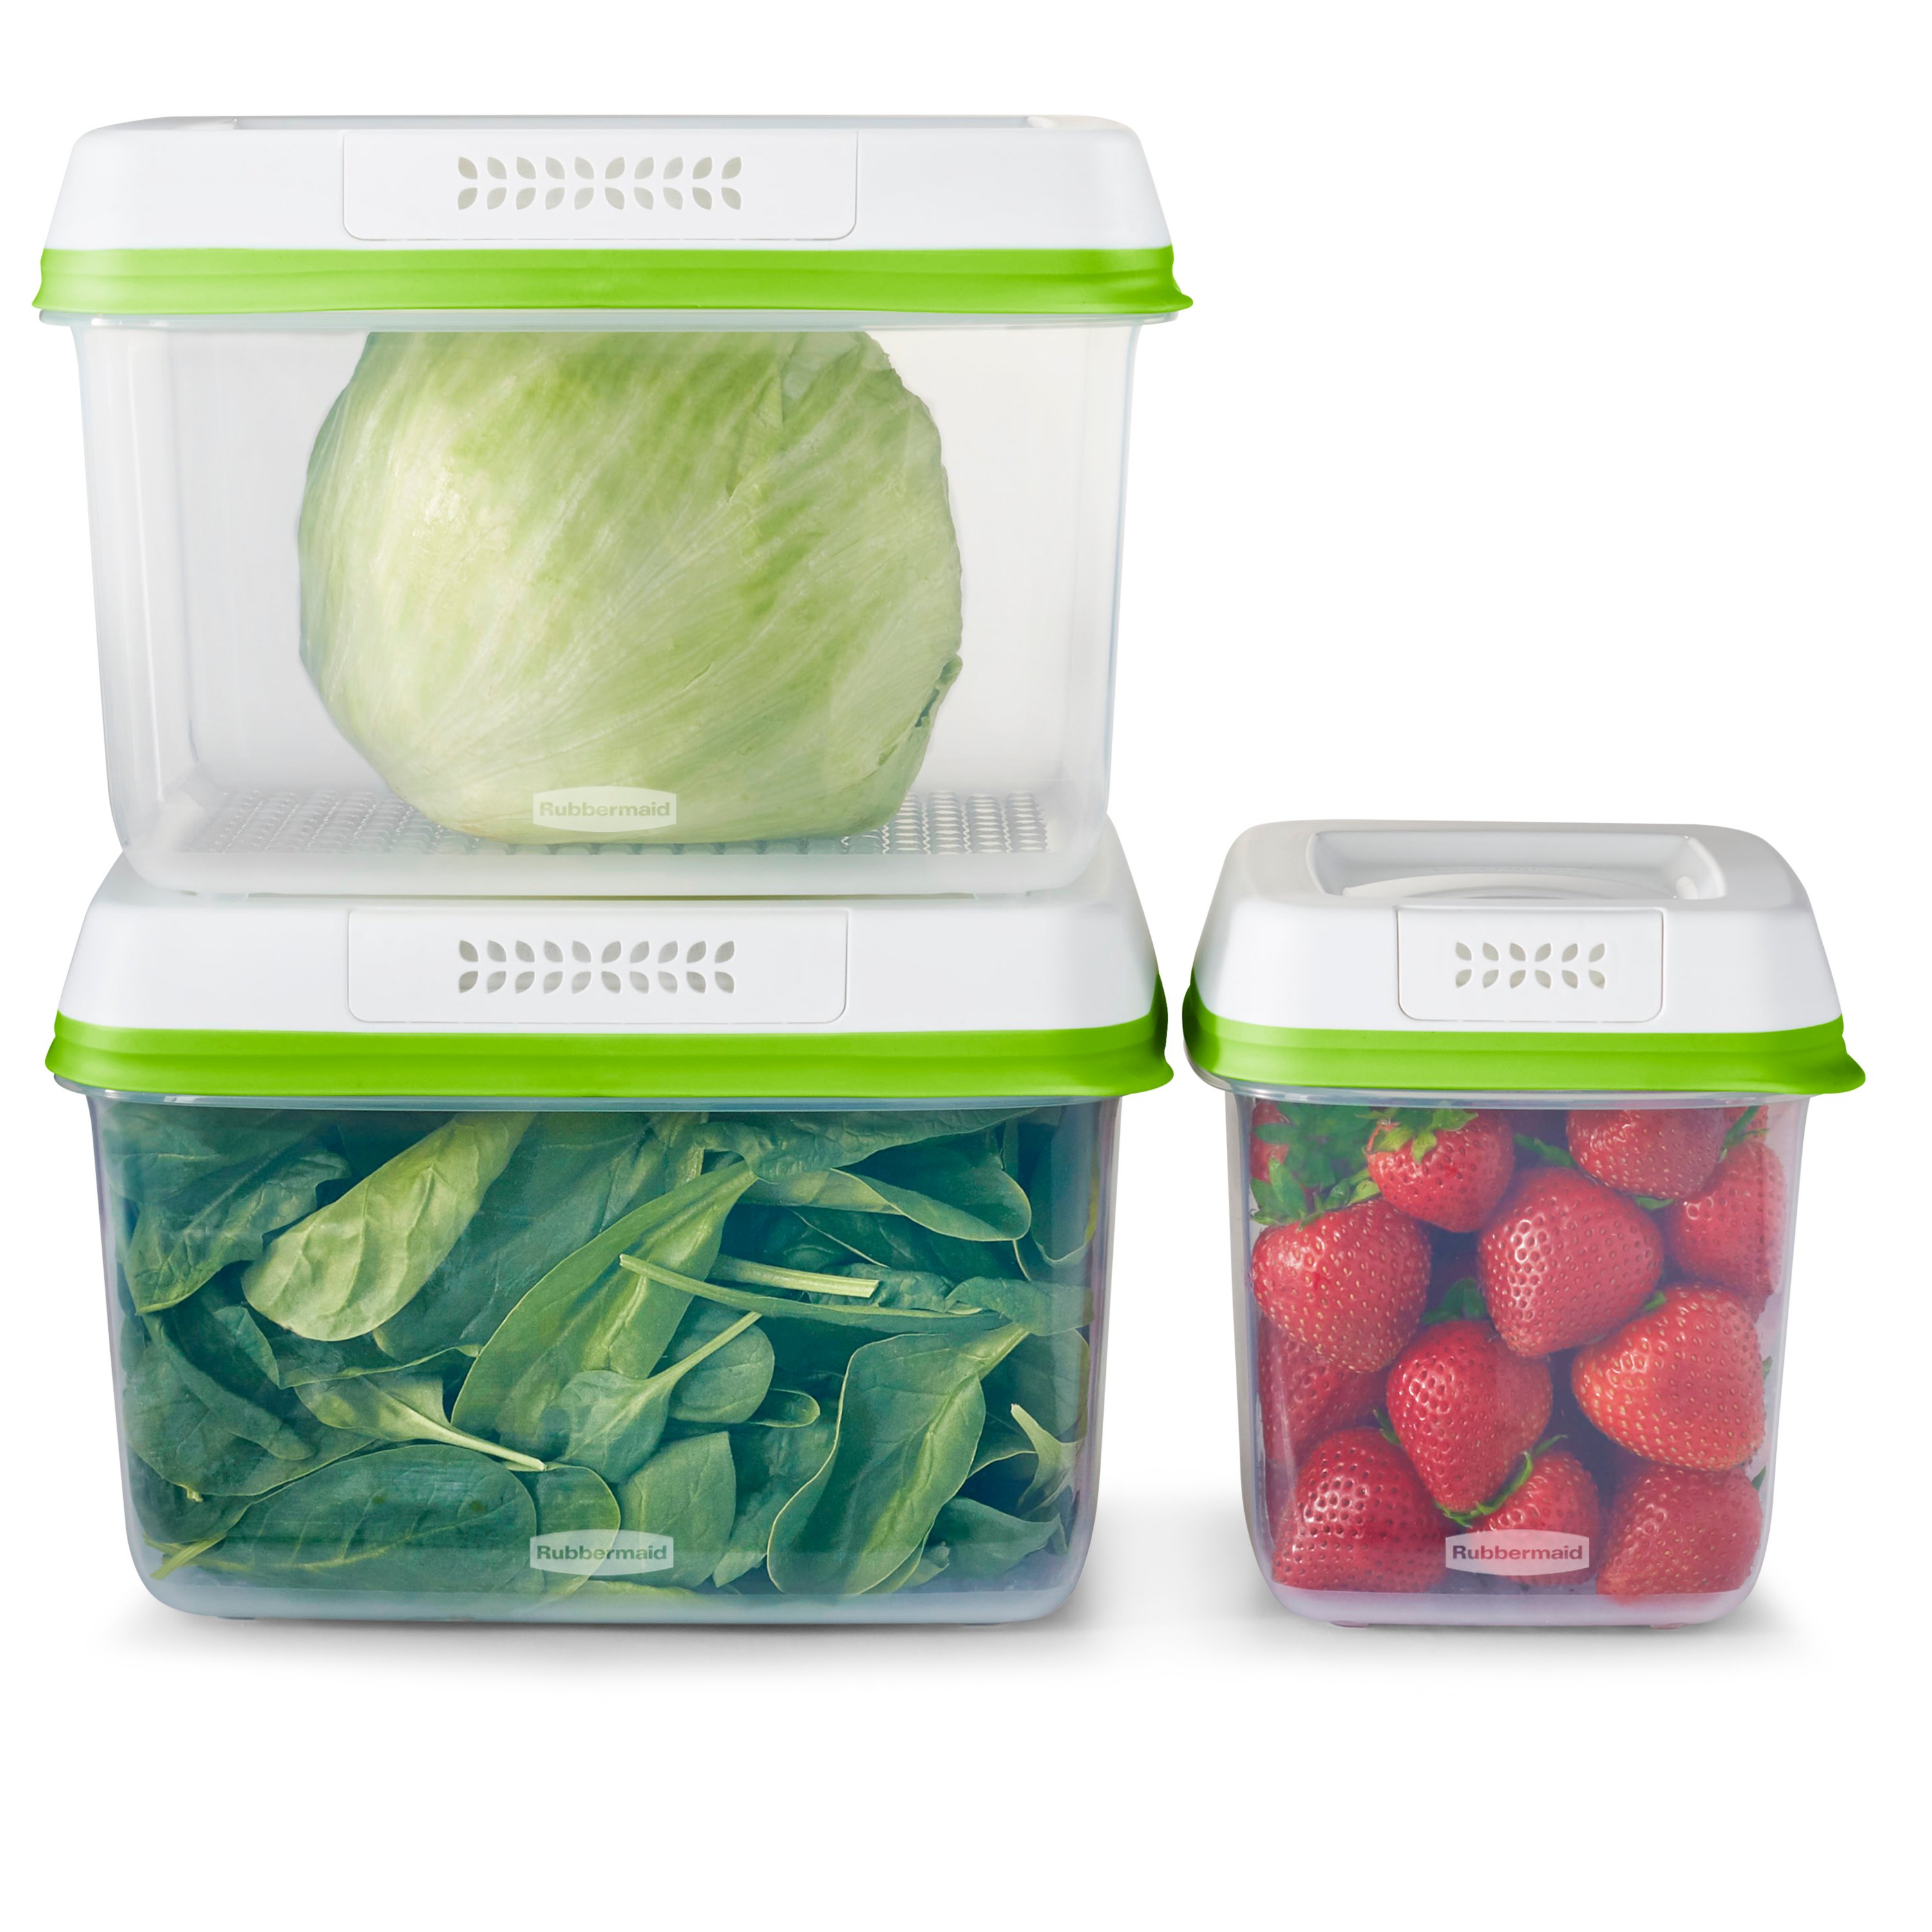 https://s7d9.scene7.com/is/image//NewellRubbermaid/2114737-rubbermaid-food-storage-green-3pk-1M-2L-group-with-food-straight-on